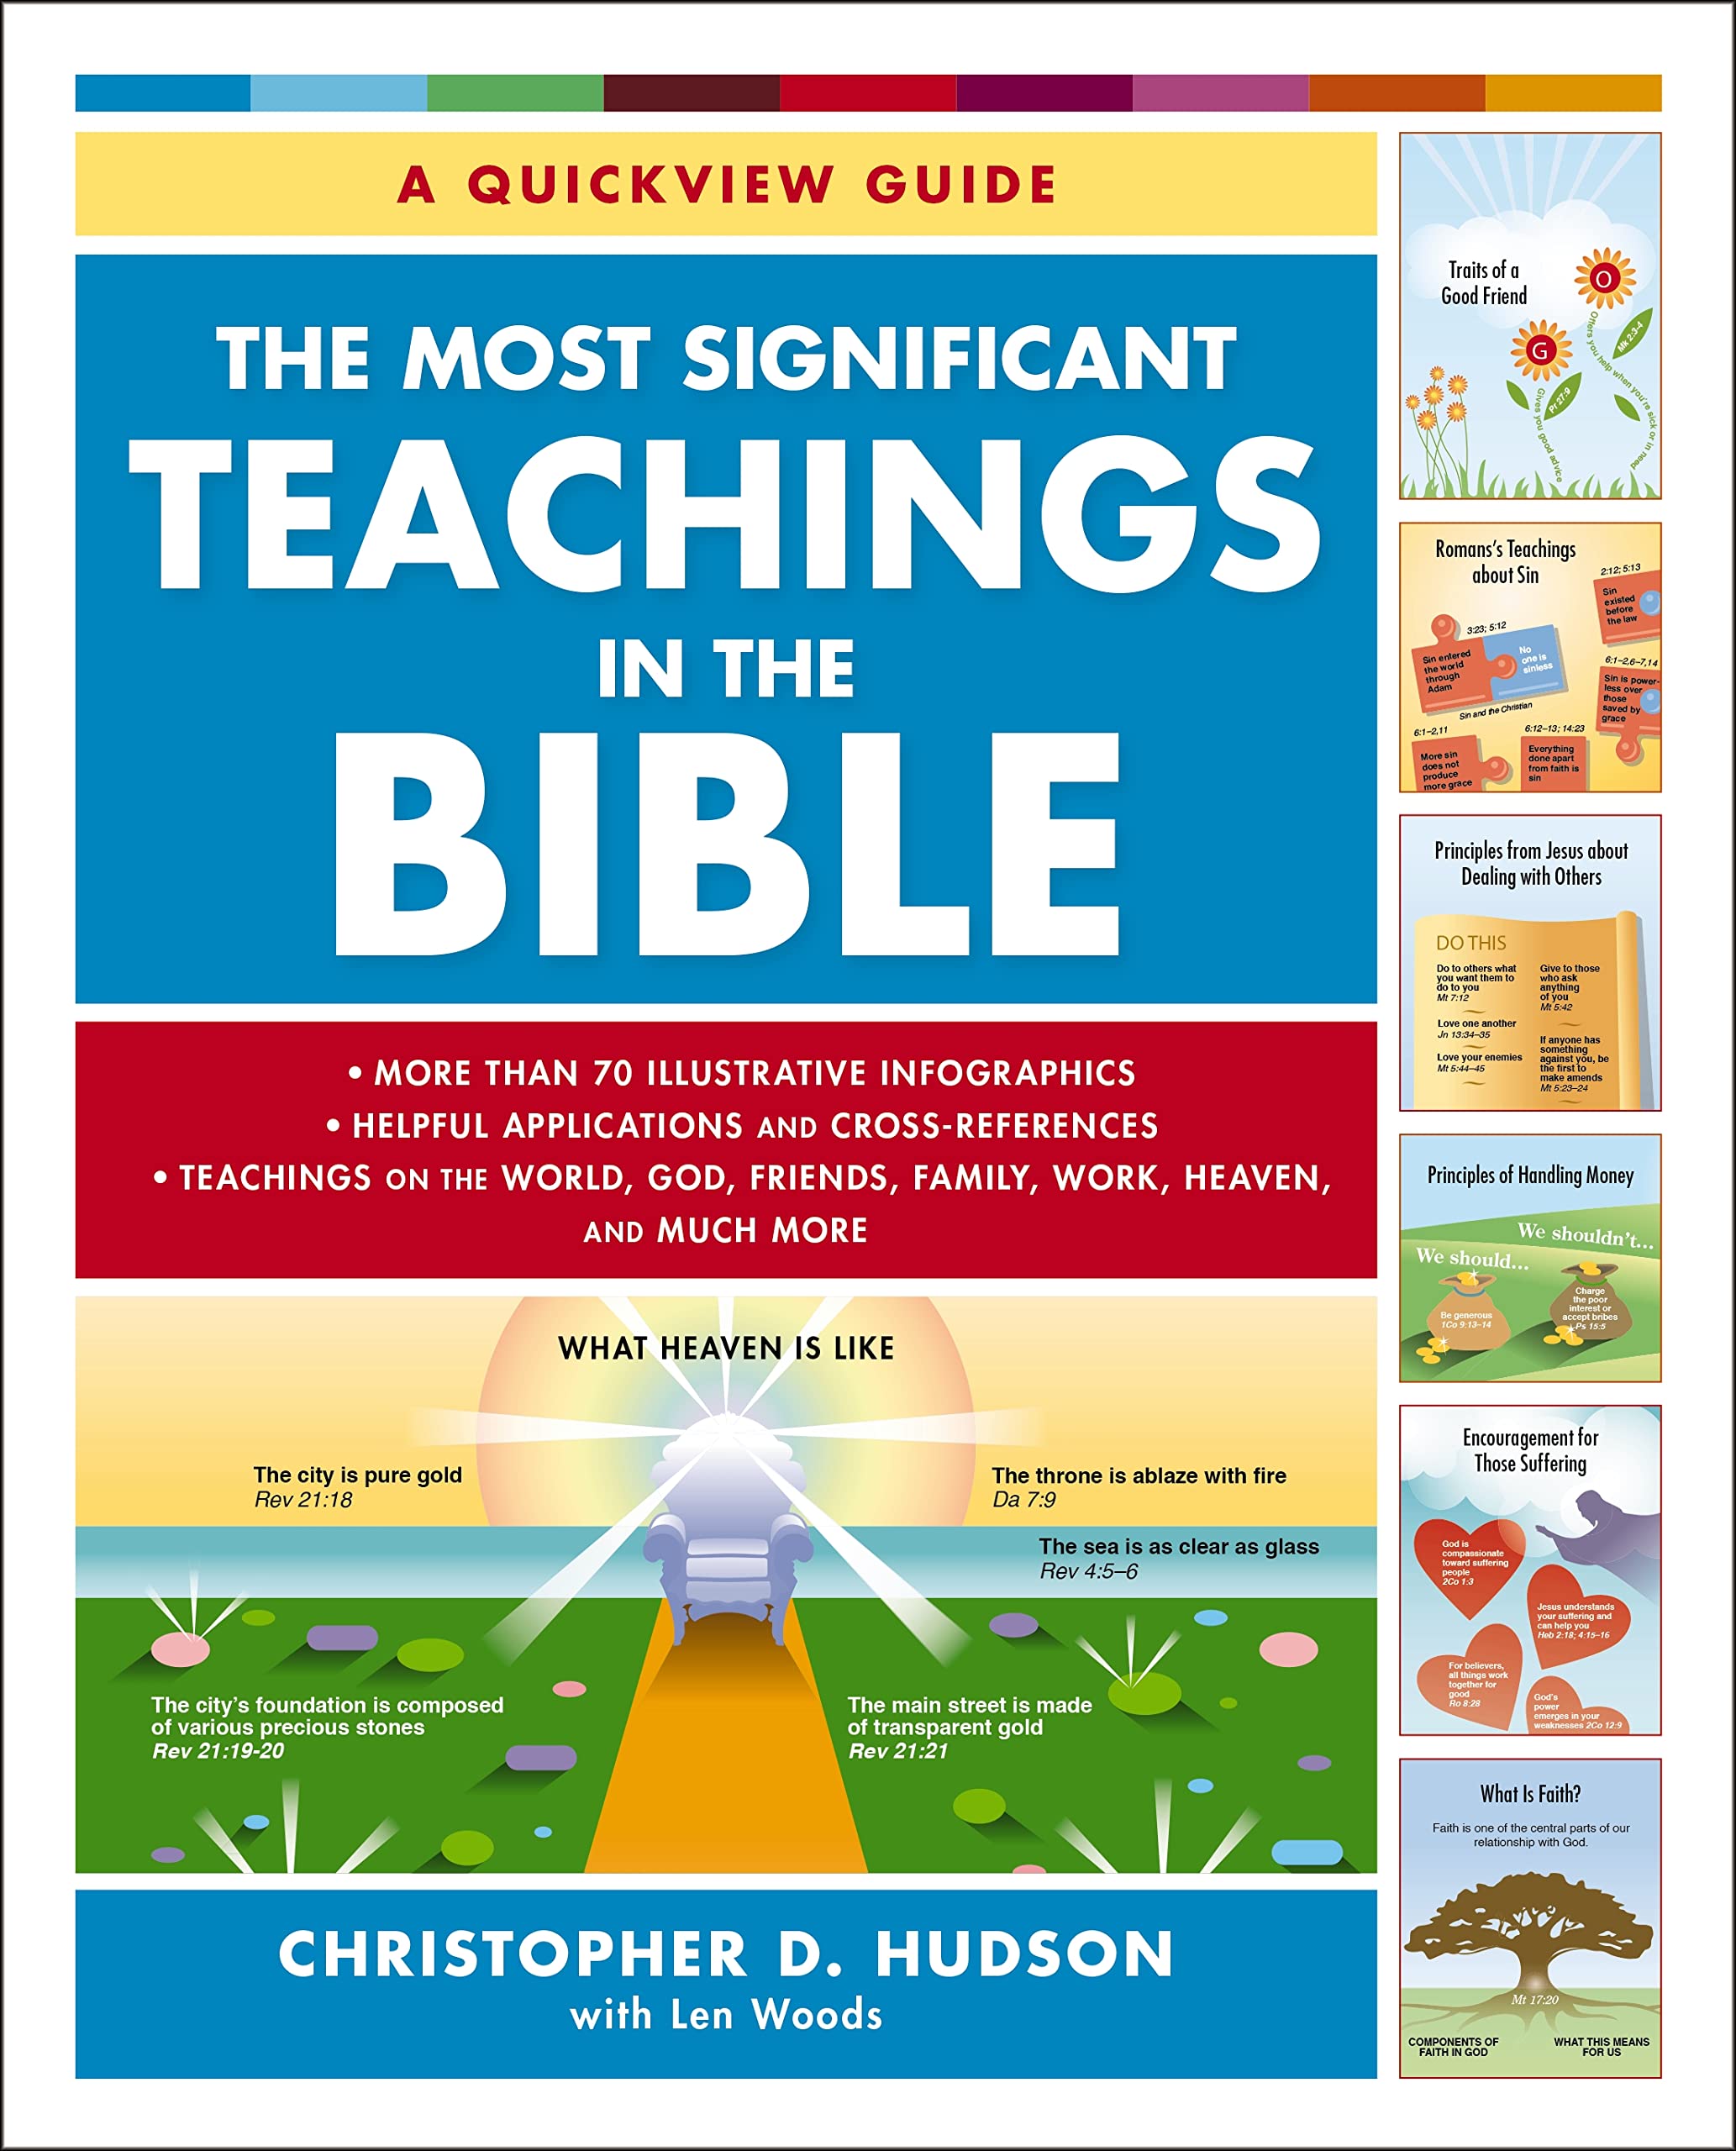 The Most Significant Teachings in the Bible (Used Copy)